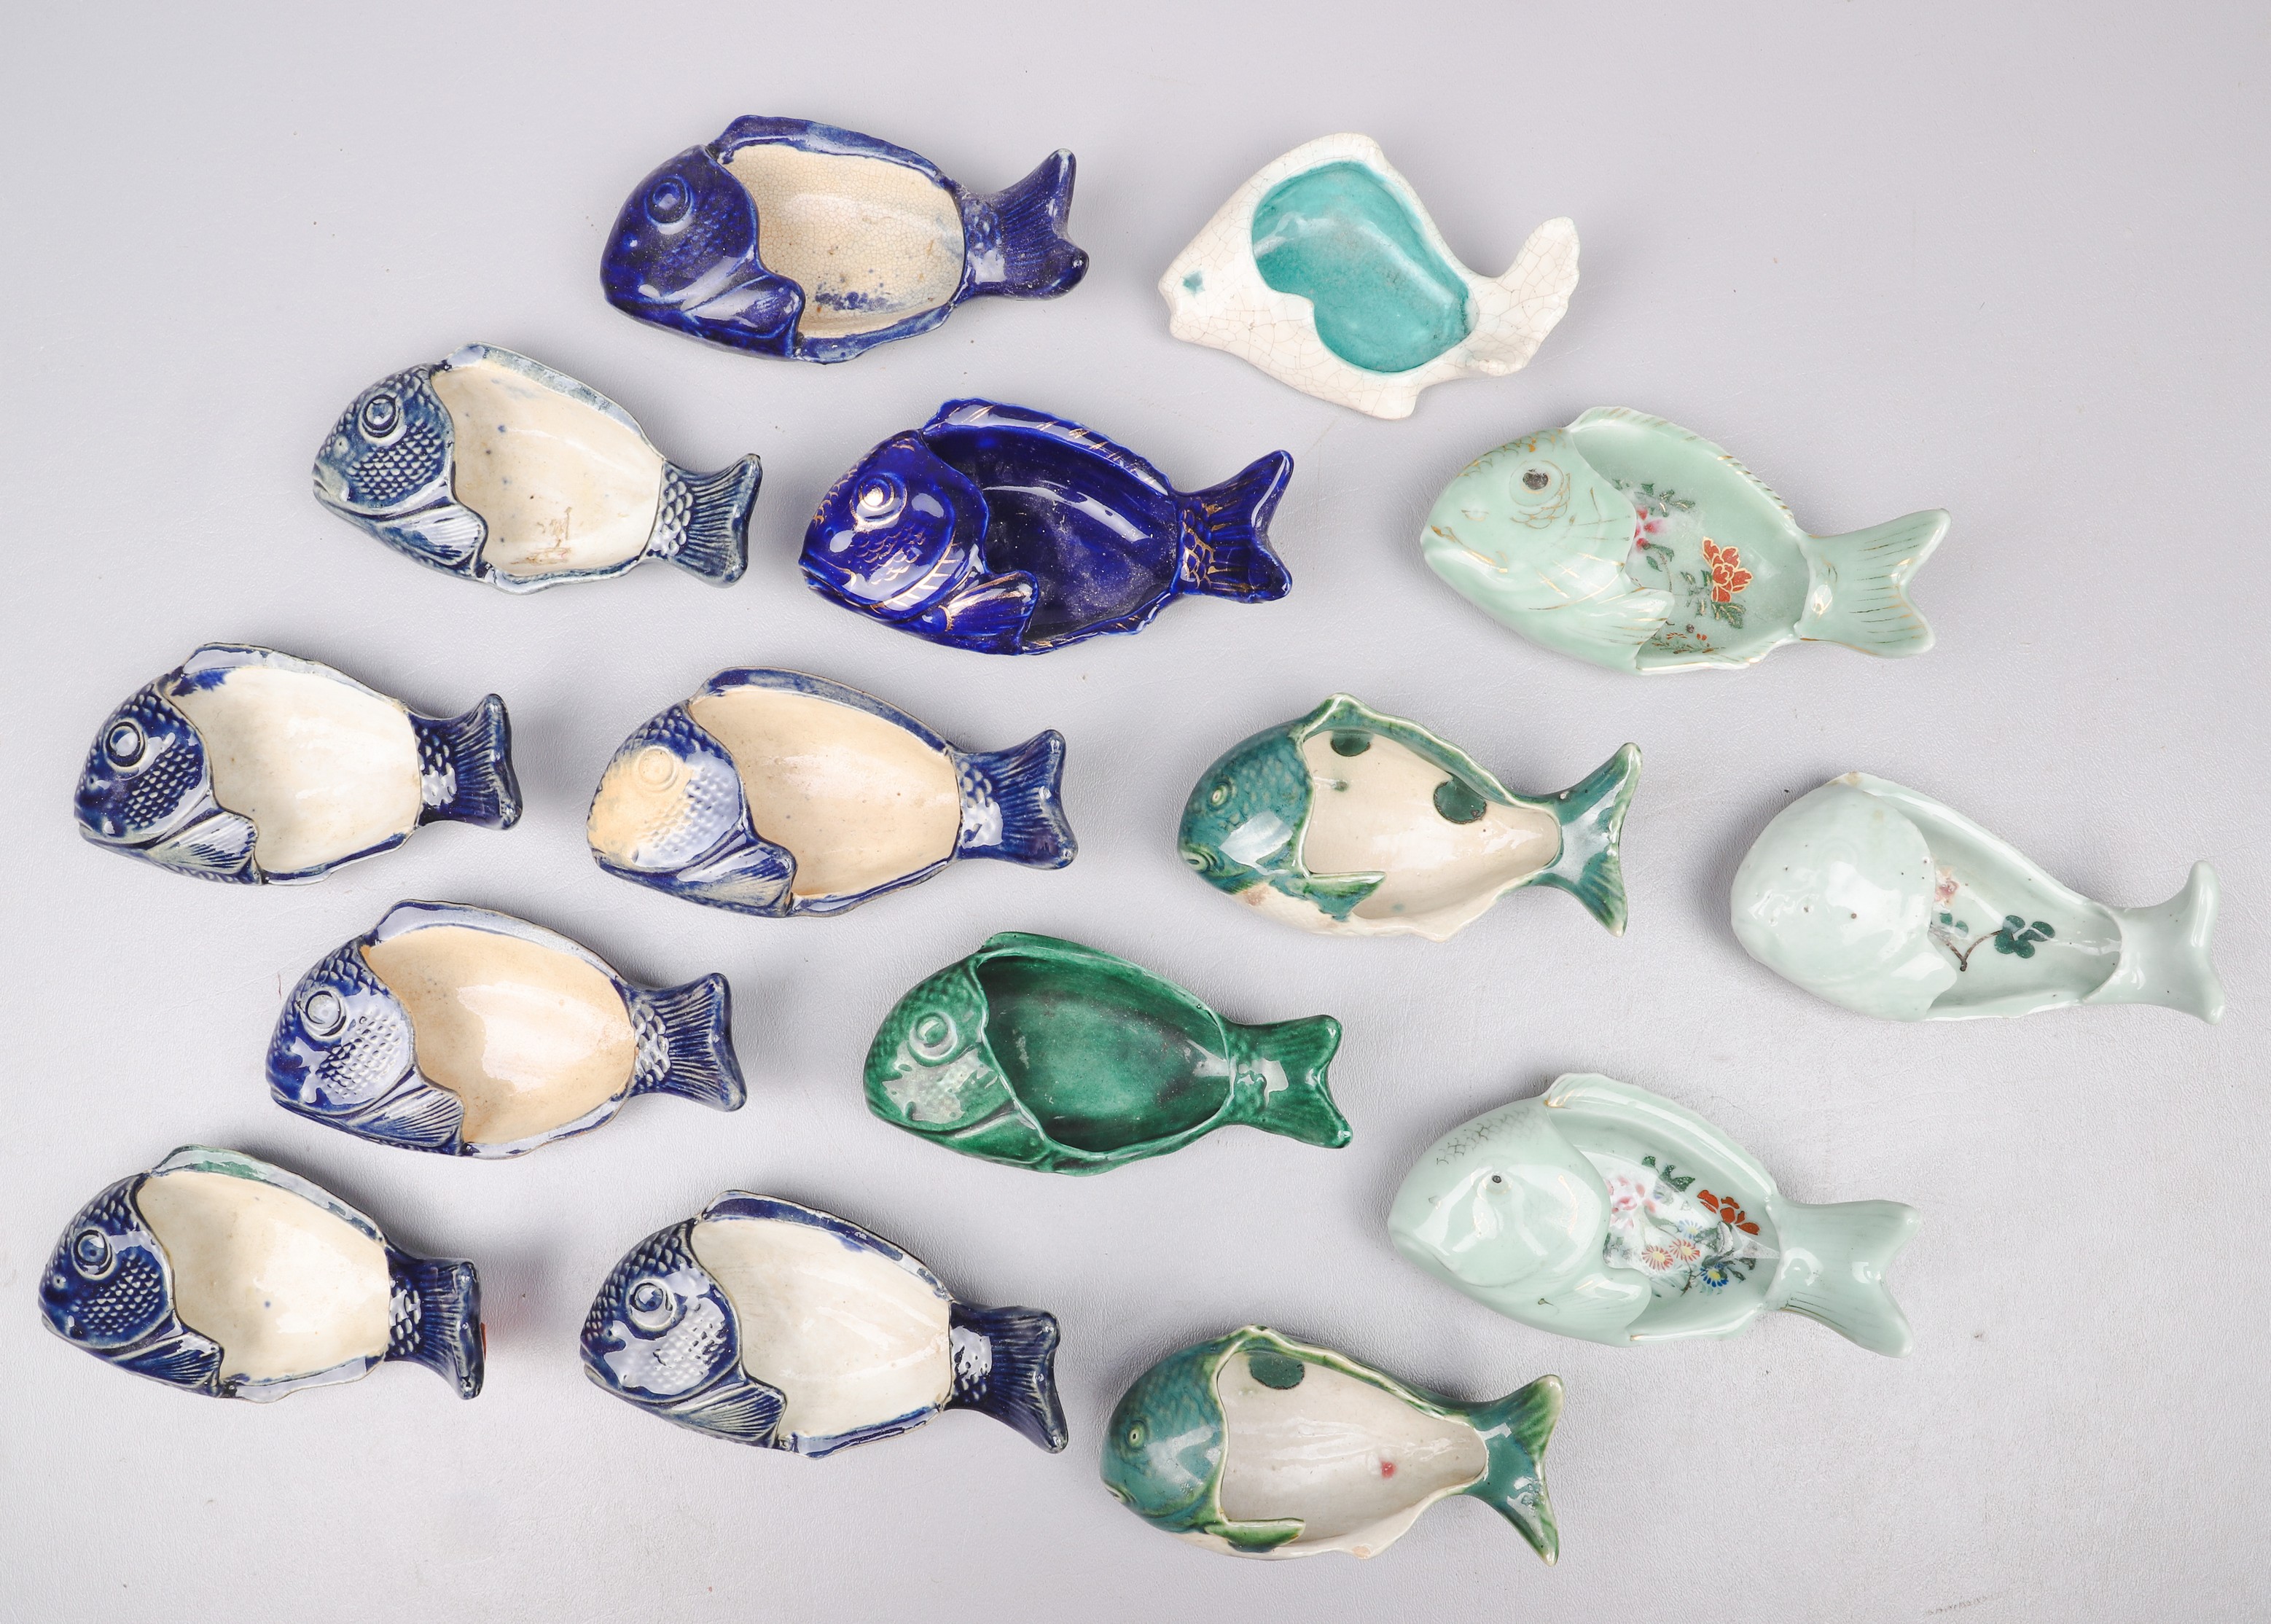  15 Chinese porcelain fish form 2e08bf